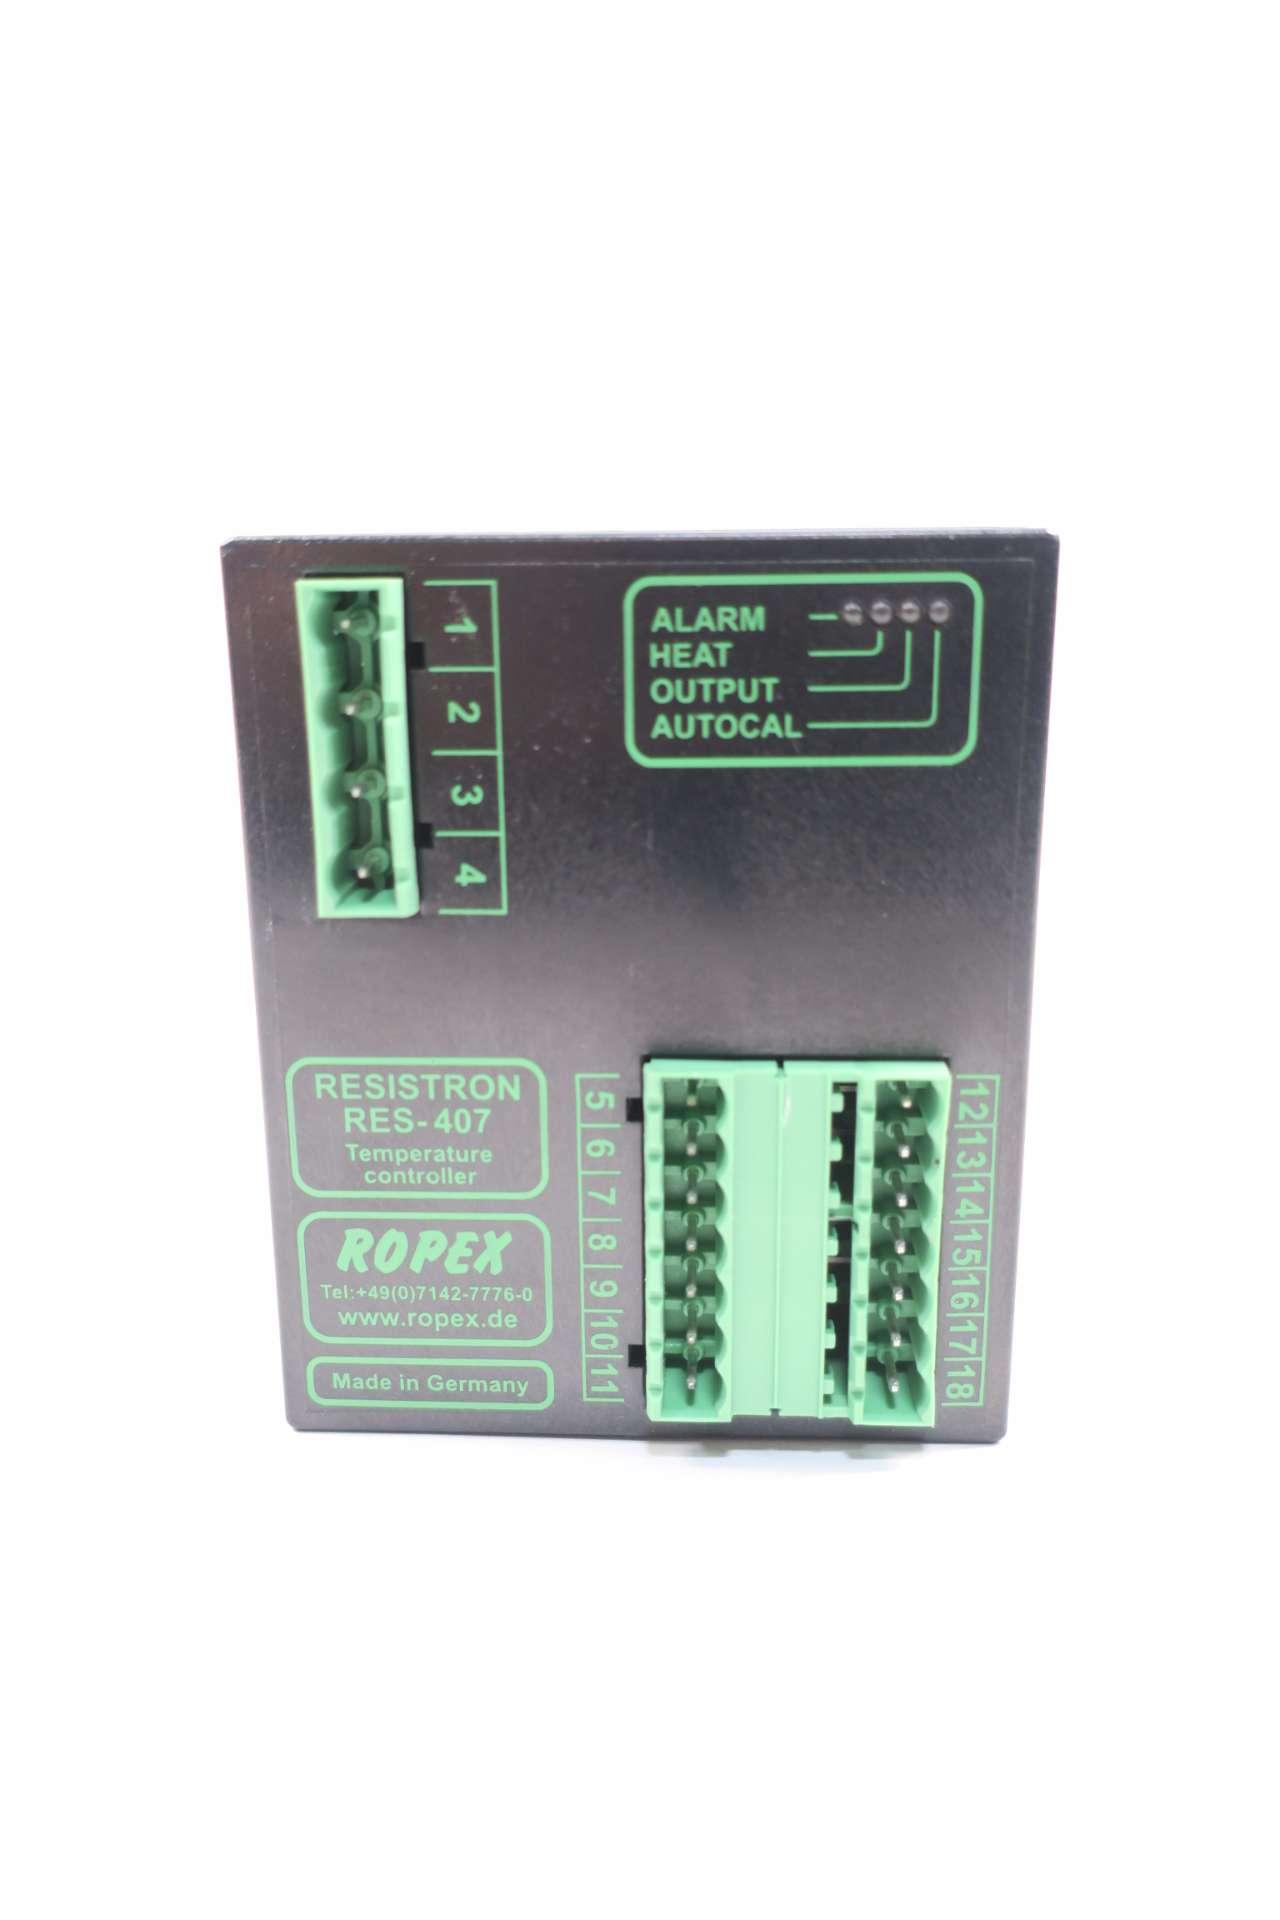 Details about   ROPEX RES-407 RESISTRON TEMPERATURE CONTROLLER TYPE RES-407/115VAC 